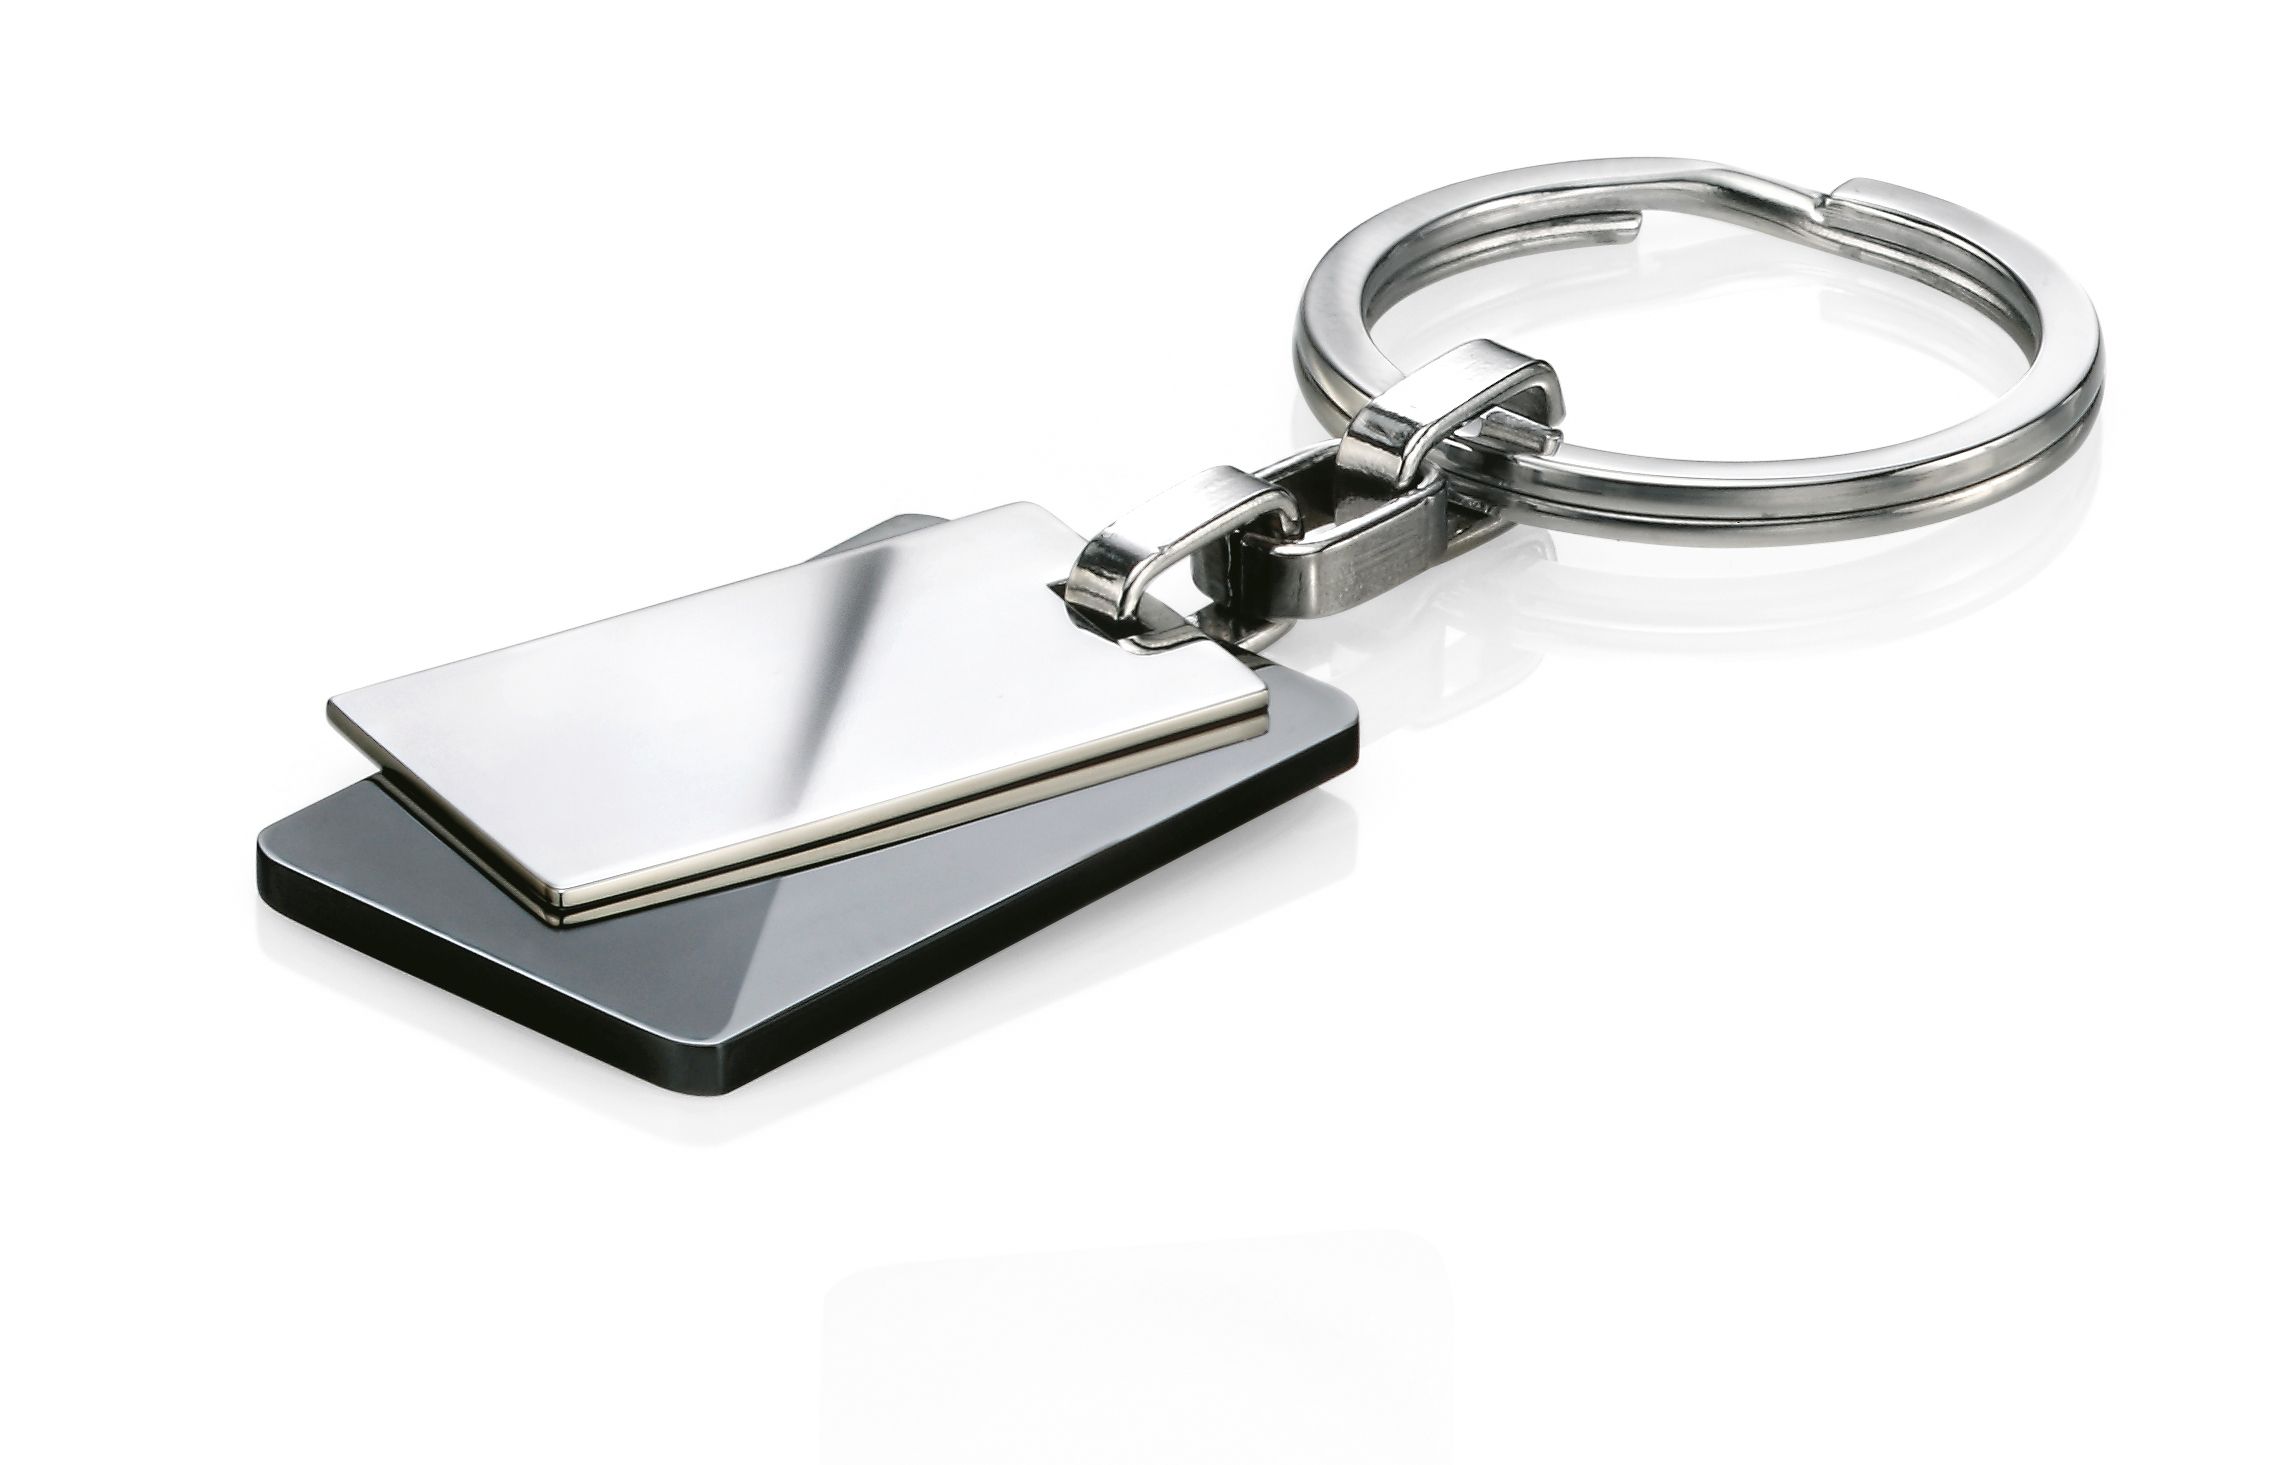 Fred Bennett Stainless Steel Black PVD Inlay KeyringDesign: With two contrasting layered rectangle shapes, this sleek keyring is the perfect addition to any gentlemans keys. With a stainless steel surface suitable for engraving and a highly polished finish, this item is a great gift idea.Composition: Made from highly polished stainless steel and black PVD plastic; nickel and cadmium compliant.Dimensions: Total height inc ring 77.5mm, PVD tag 33mm, polished tag 27.5mm, Width PVD tag 22mm, polished tag 16.1mm, Depth PVD tag 1.9mm, polished tag 1mm.Key ring size: Features a 23mm key ringPackaging: Comes complete with a branded presentation gift box - perfect for storing the item and ideal for gifting.